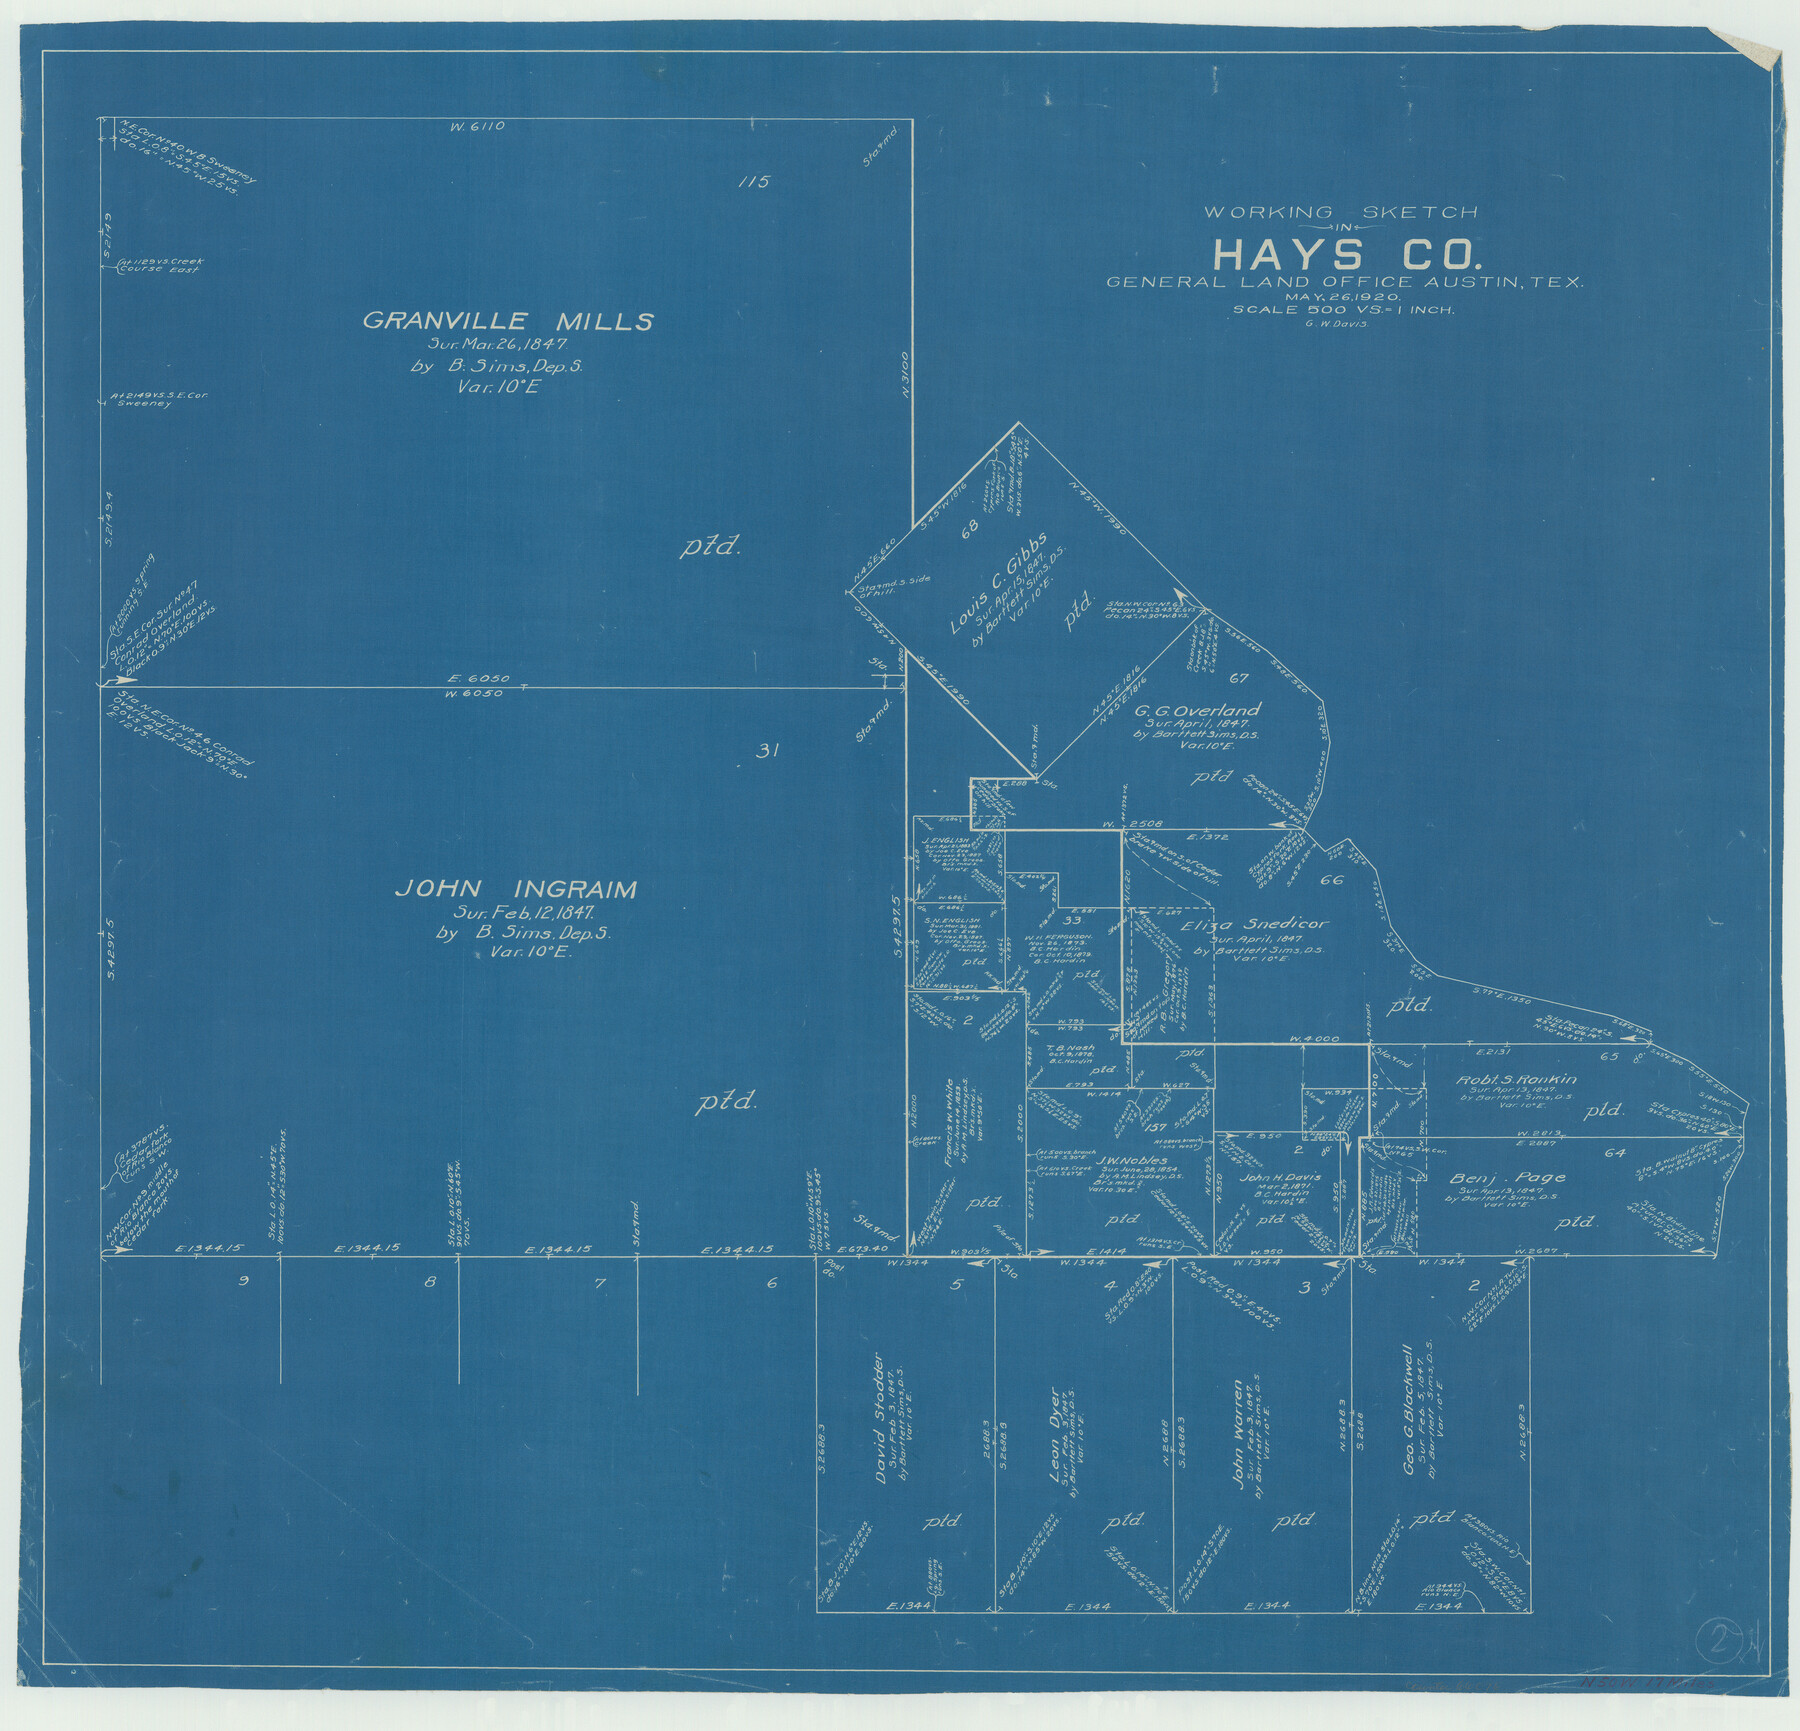 66076, Hays County Working Sketch 2, General Map Collection